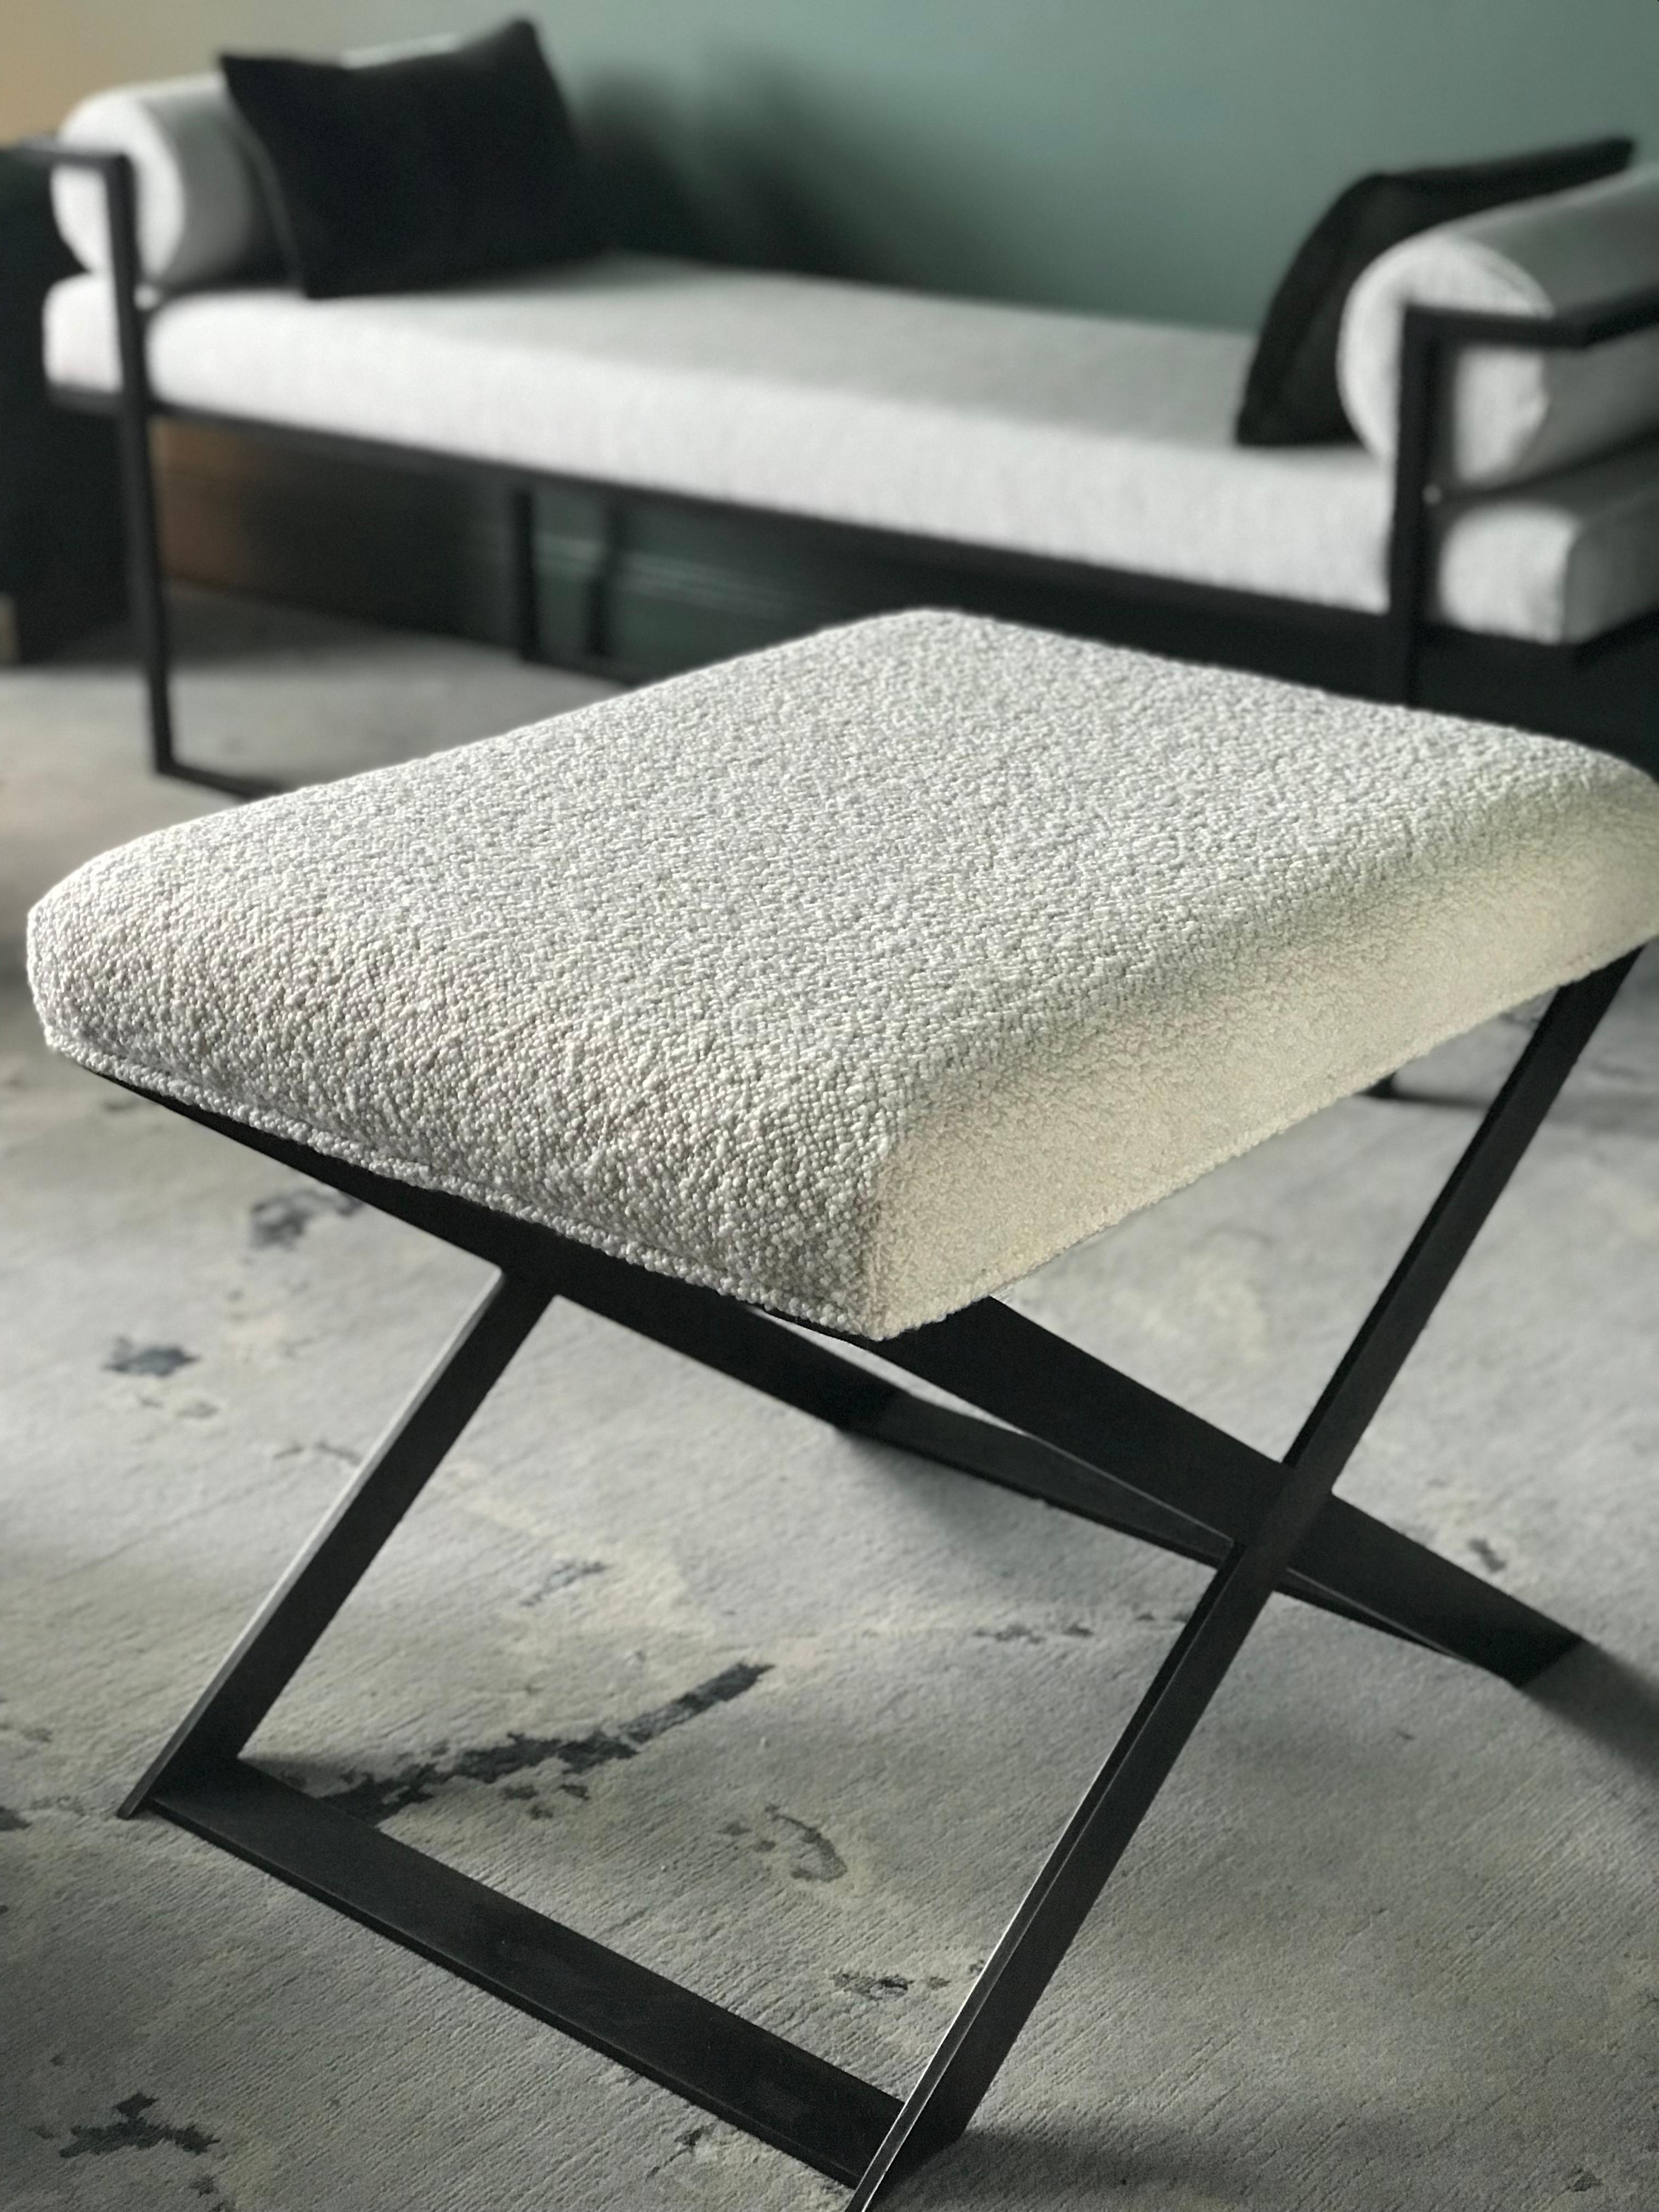 Its shape radiates dominance while its aesthetic harmonises with Casa Botelho’s signature style, Masculine Glamour. The X-Leg Stool will complement a variety of spaces from the bedroom to the living room, with its distinctive combination of hard and